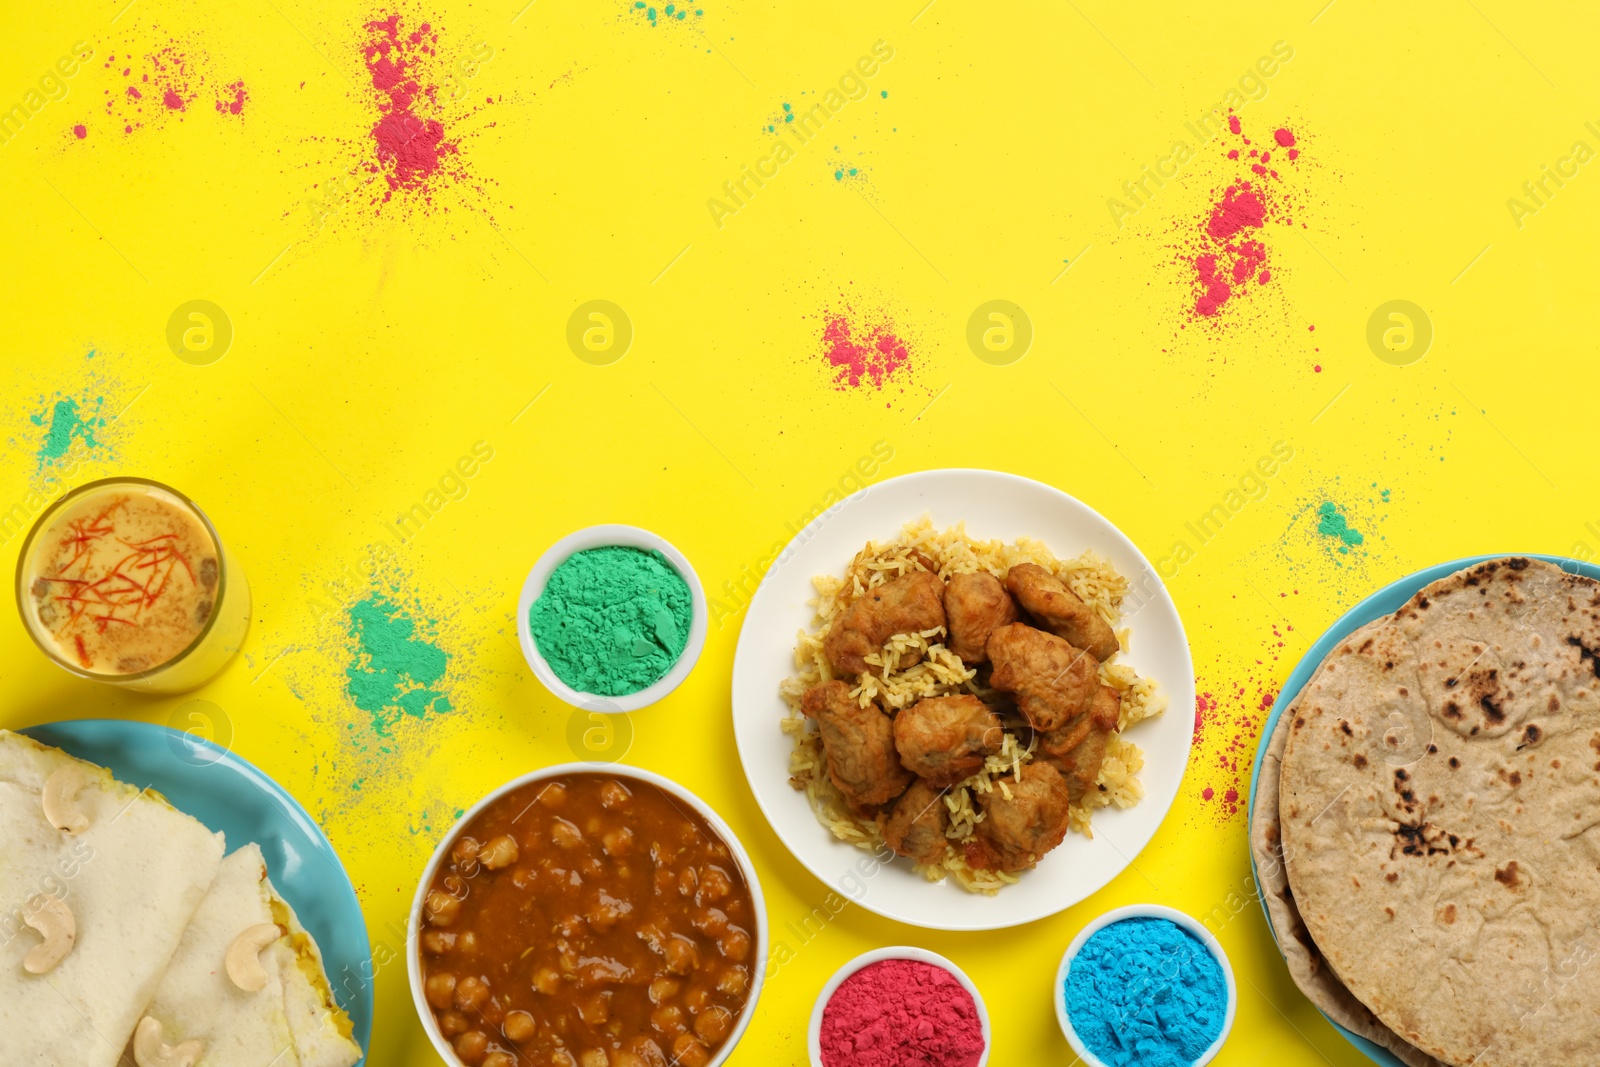 Photo of Traditional Indian food and color powders on yellow background, flat lay. Holi festival celebration